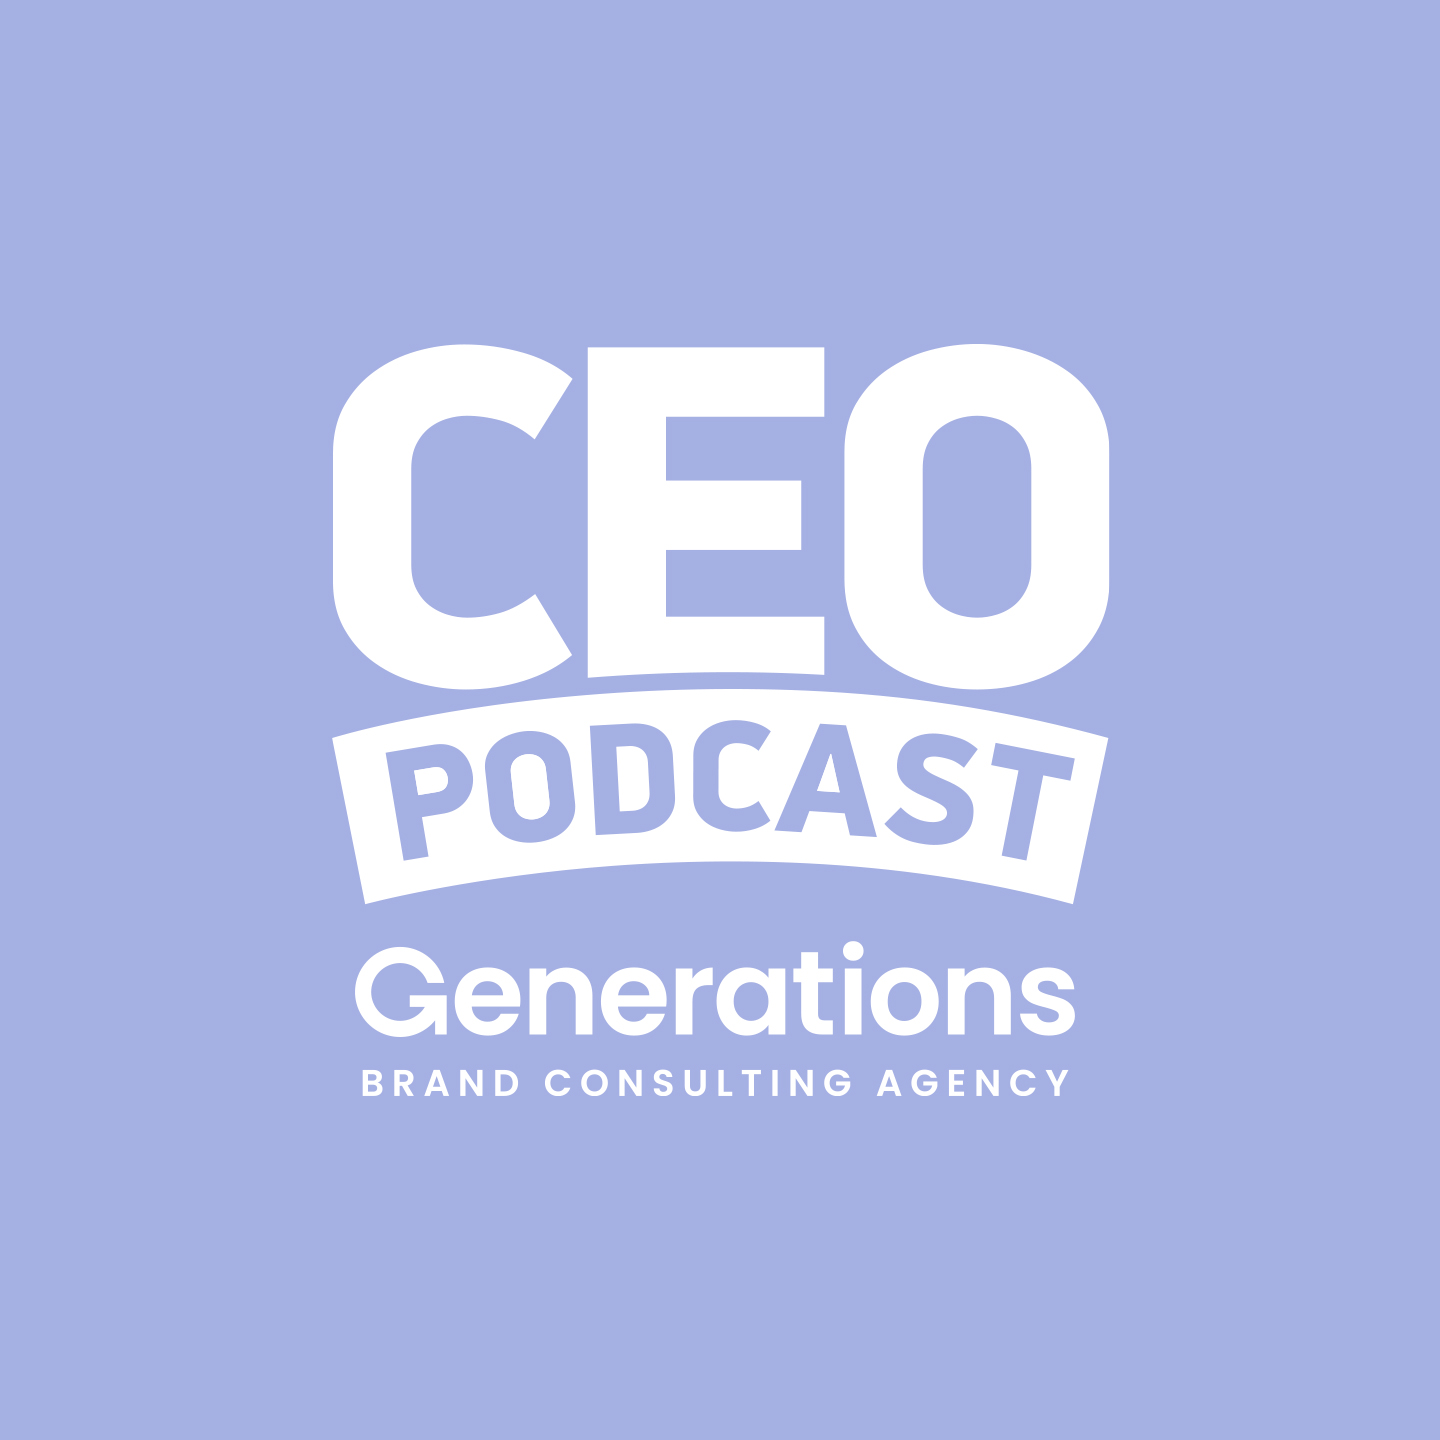 CEO Podcast by Generations